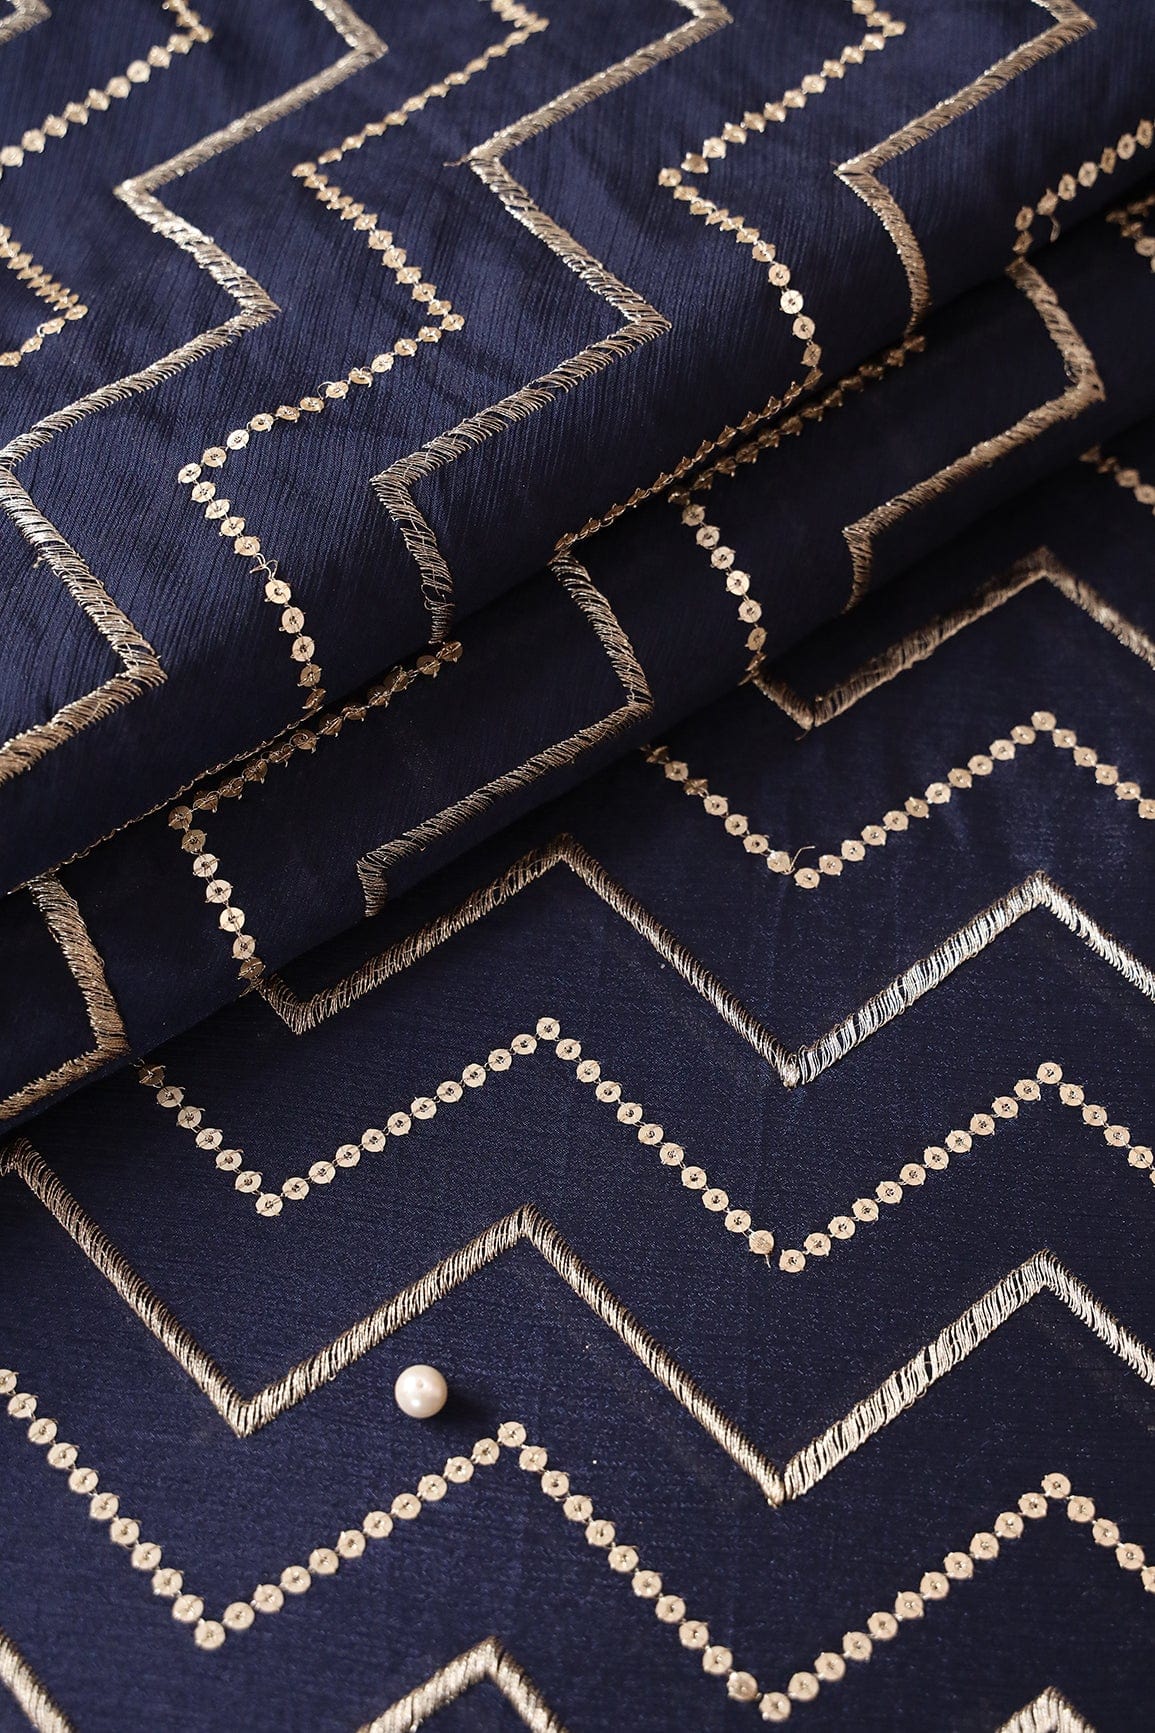 doeraa Embroidery Fabrics 3 Meter Cut Piece Of Gold Zari With Gold Sequins Chevron Embroidery Work On Navy Blue Chinnon Chiffon Fabric